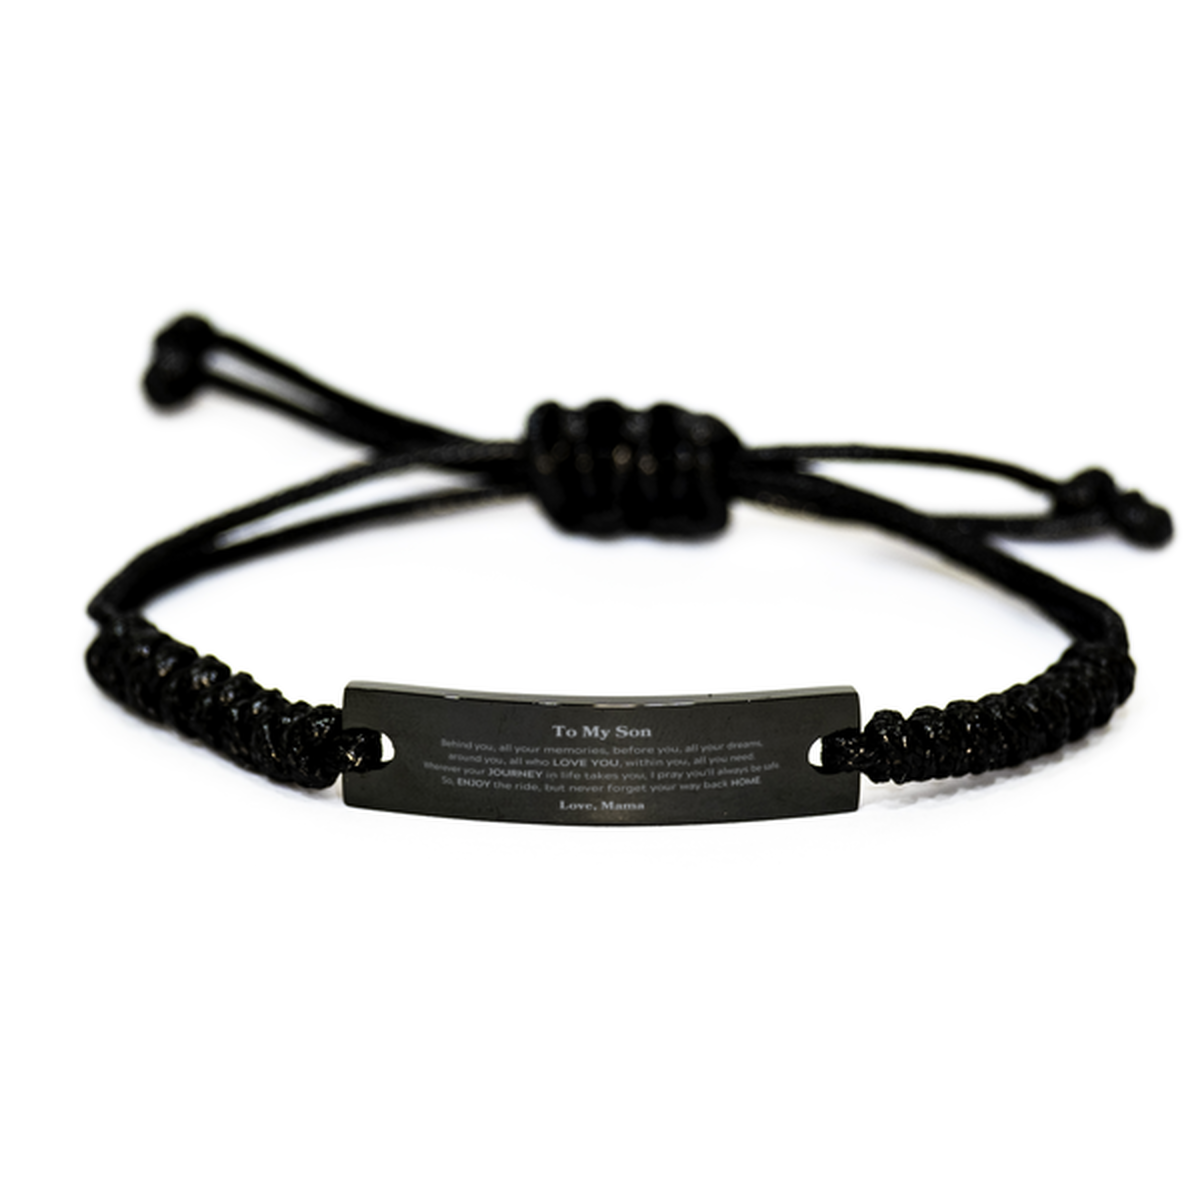 To My Son Graduation Gifts from Mama, Son Black Rope Bracelet Christmas Birthday Gifts for Son Behind you, all your memories, before you, all your dreams. Love, Mama